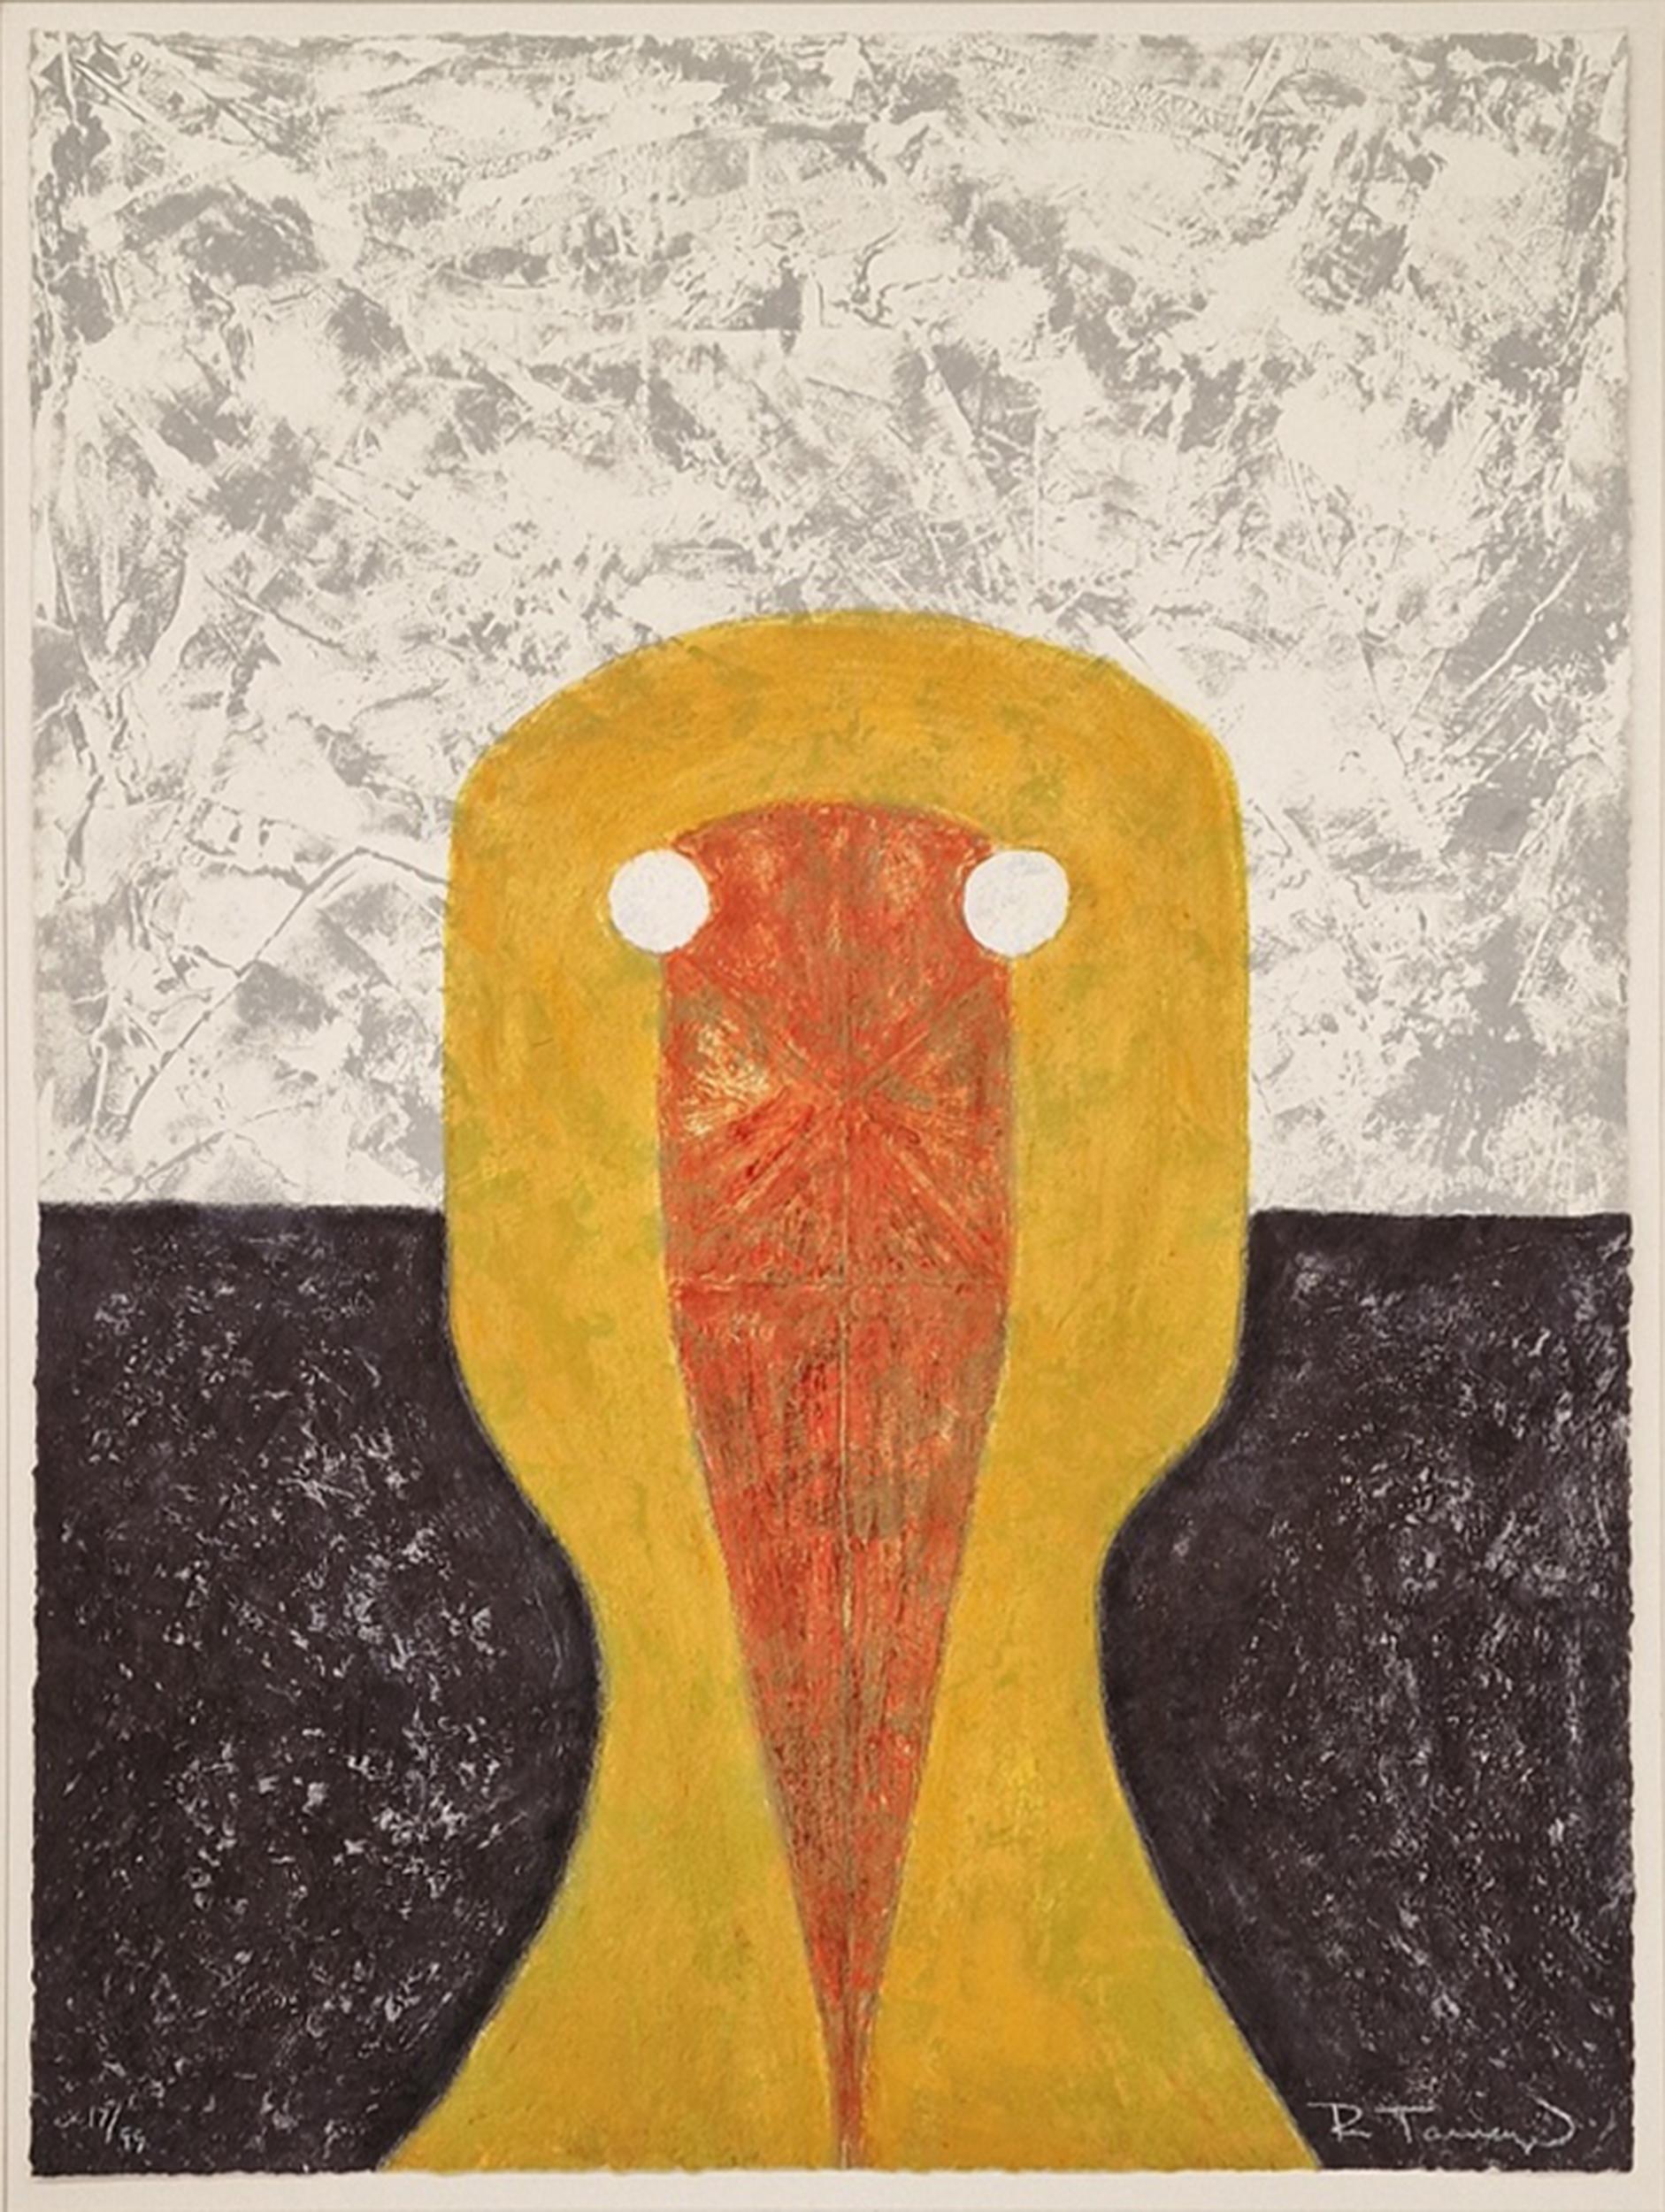 How many paintings did Rufino Tamayo have?